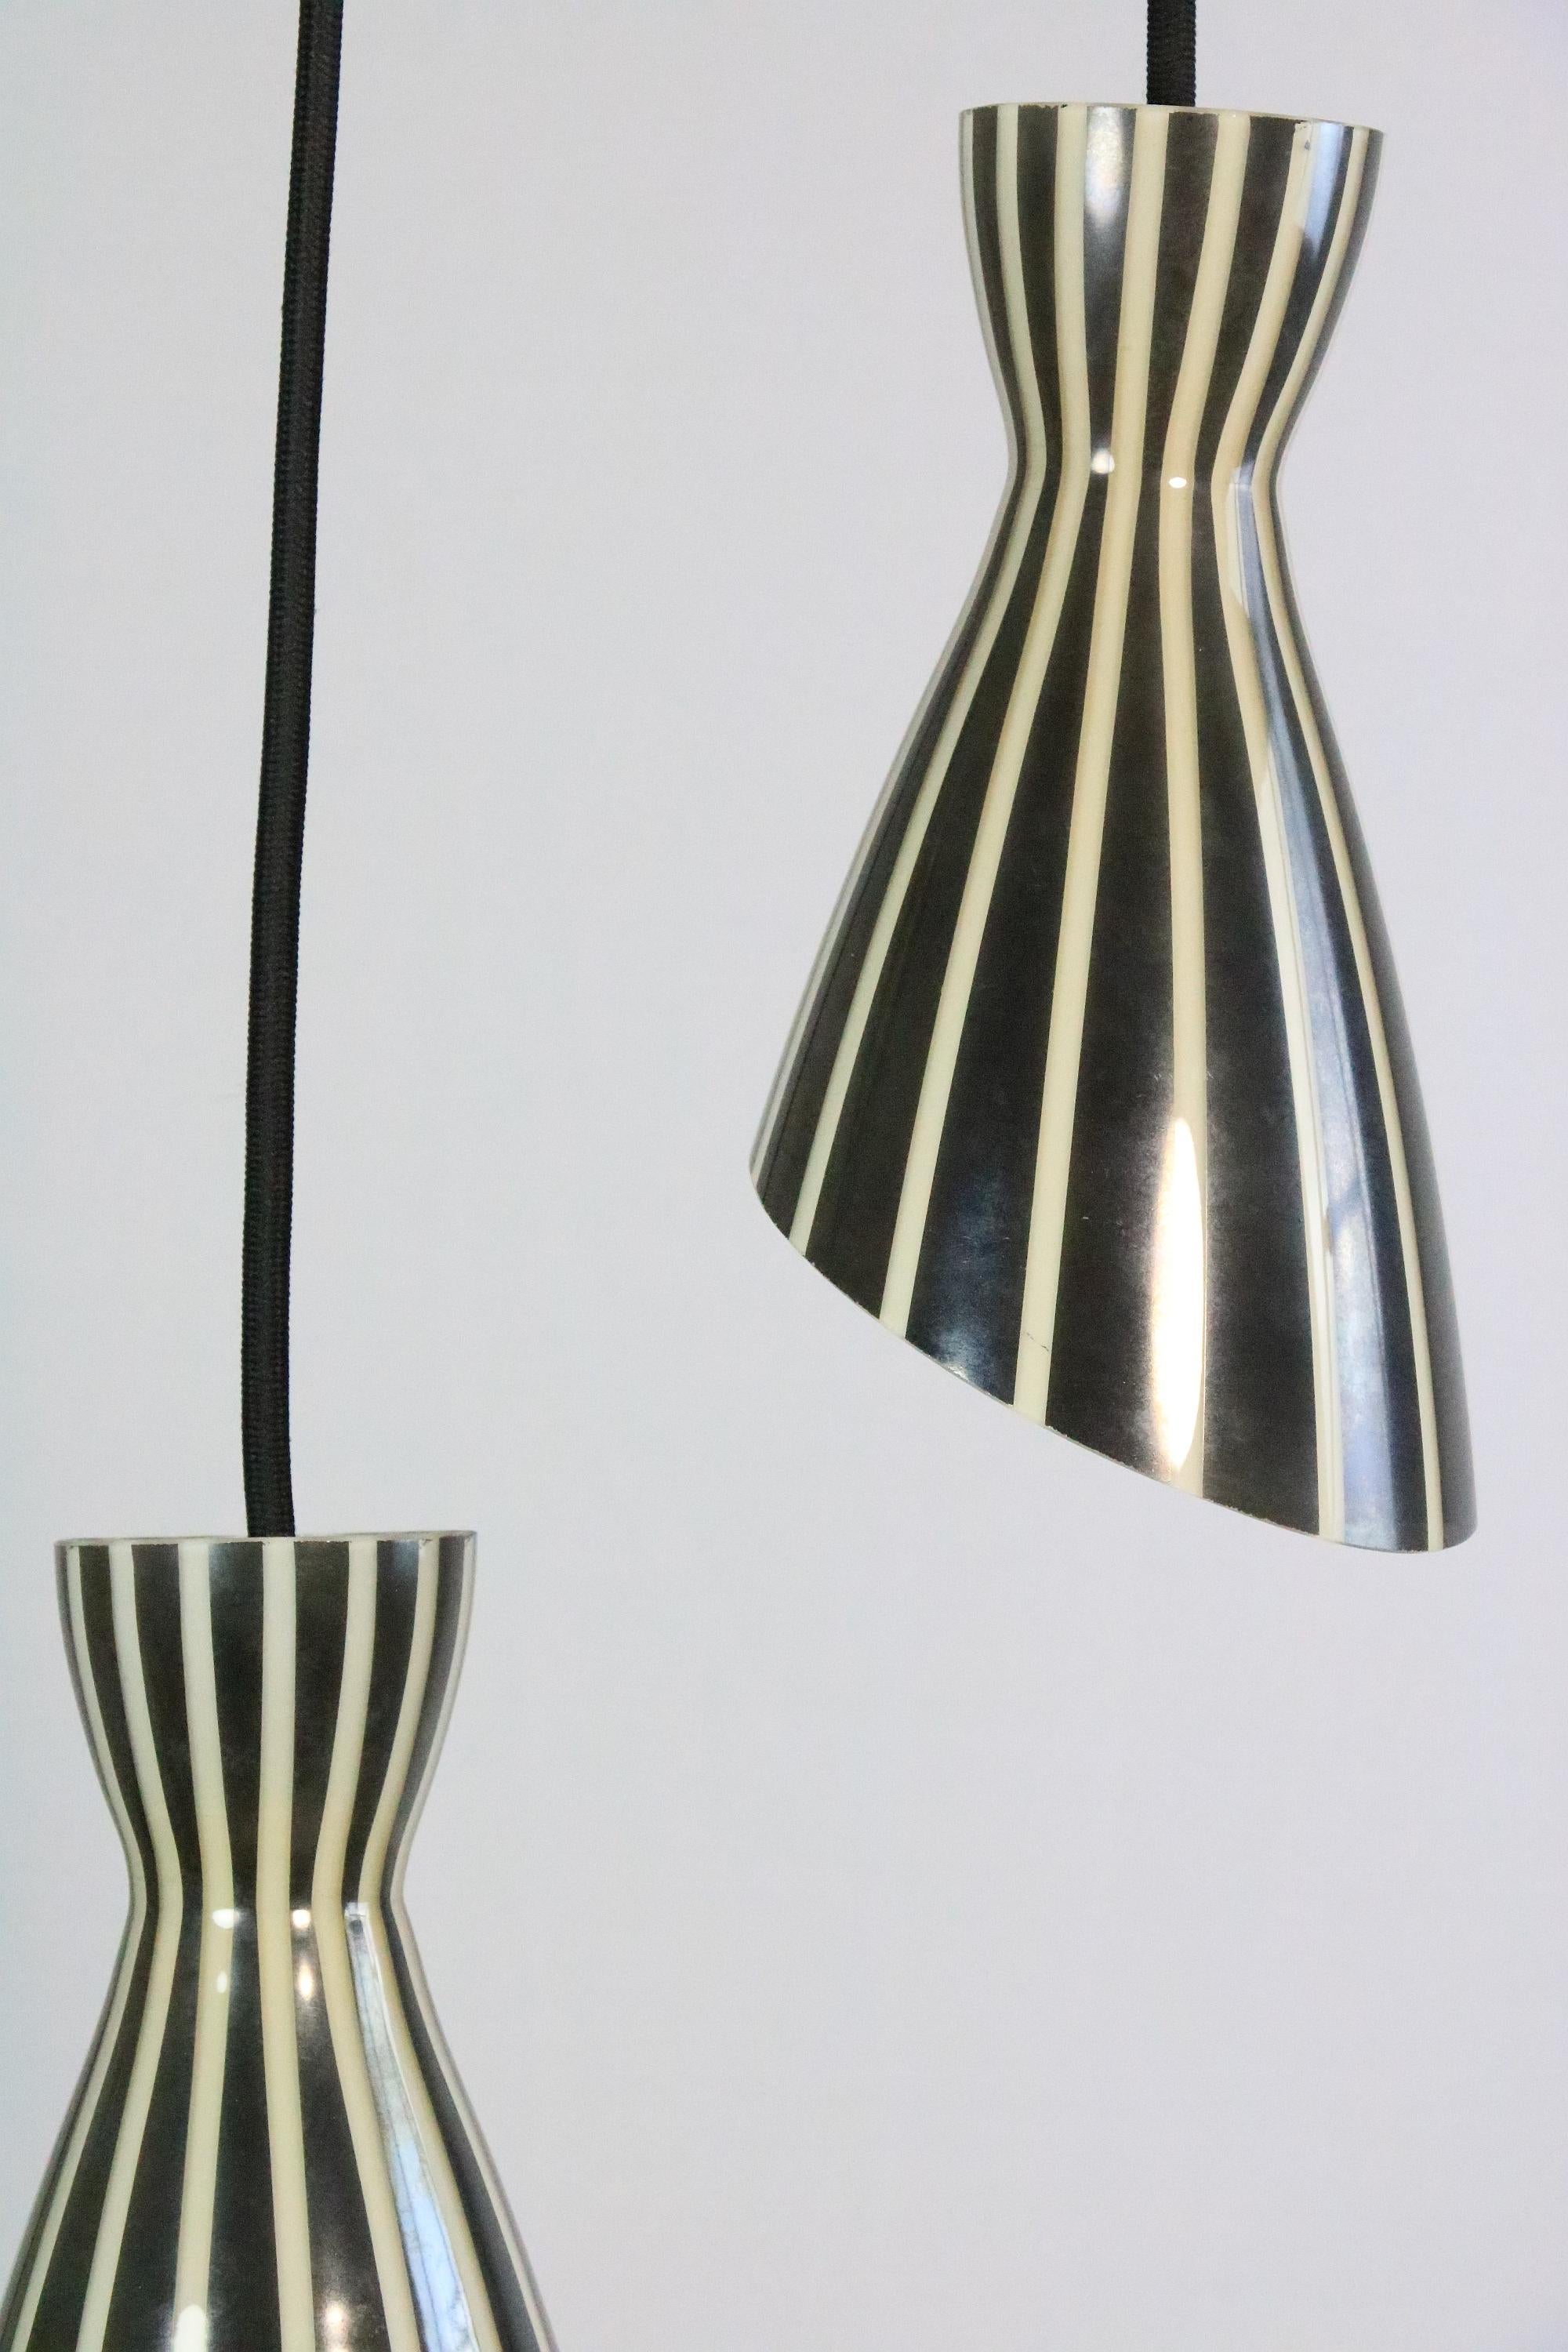 German Set of 2 Glass Hanging Lamps, Black and White Striped, Original 1950s For Sale